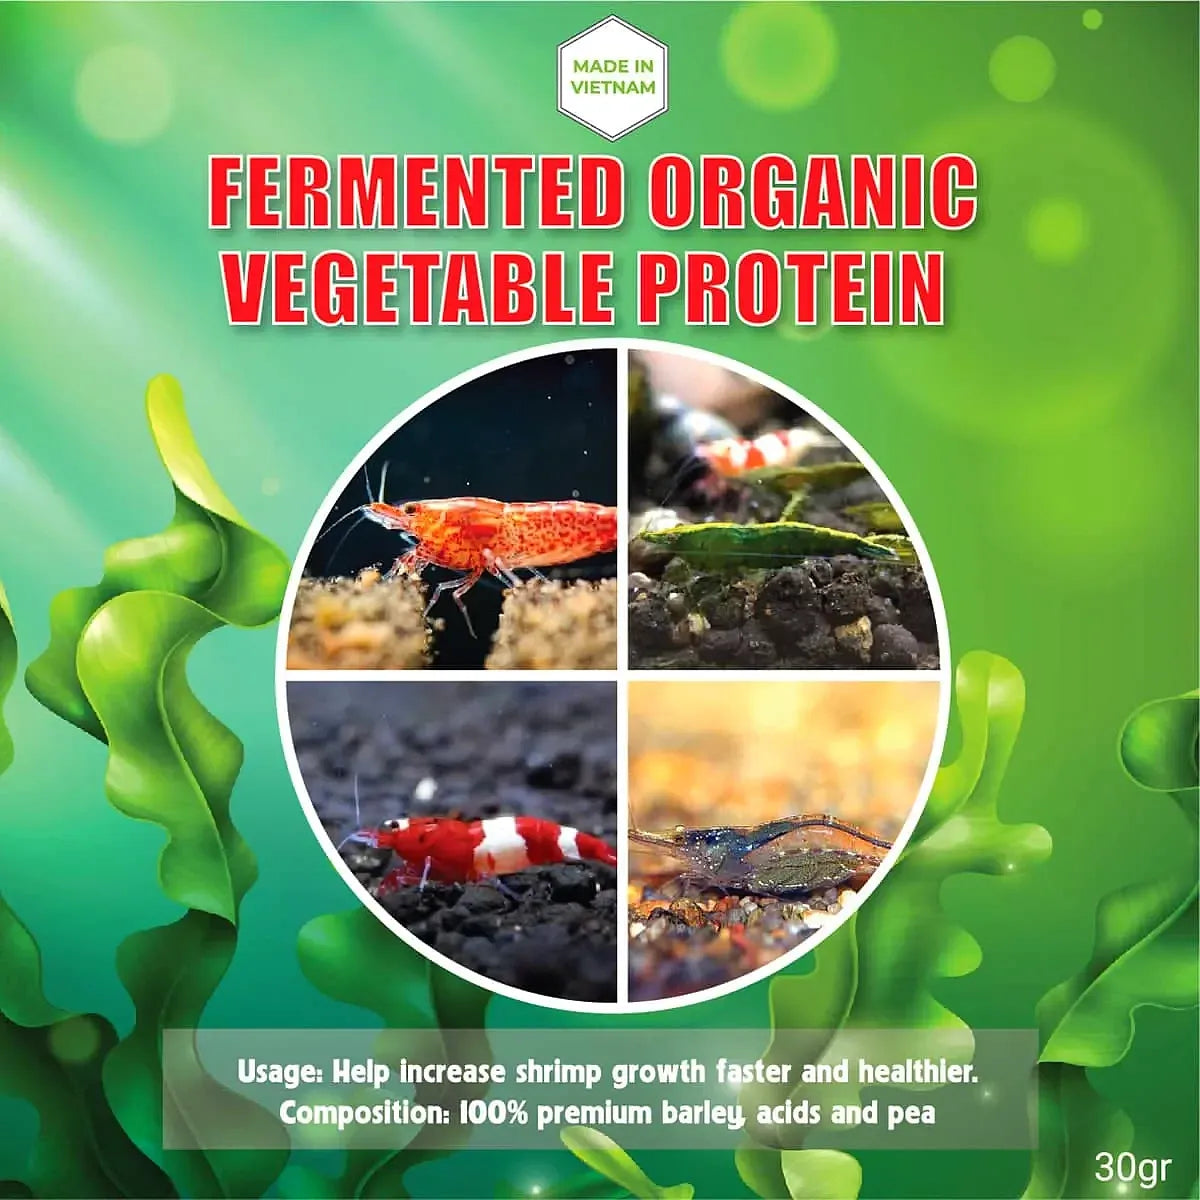 Fermented Organic Vegetable Protein